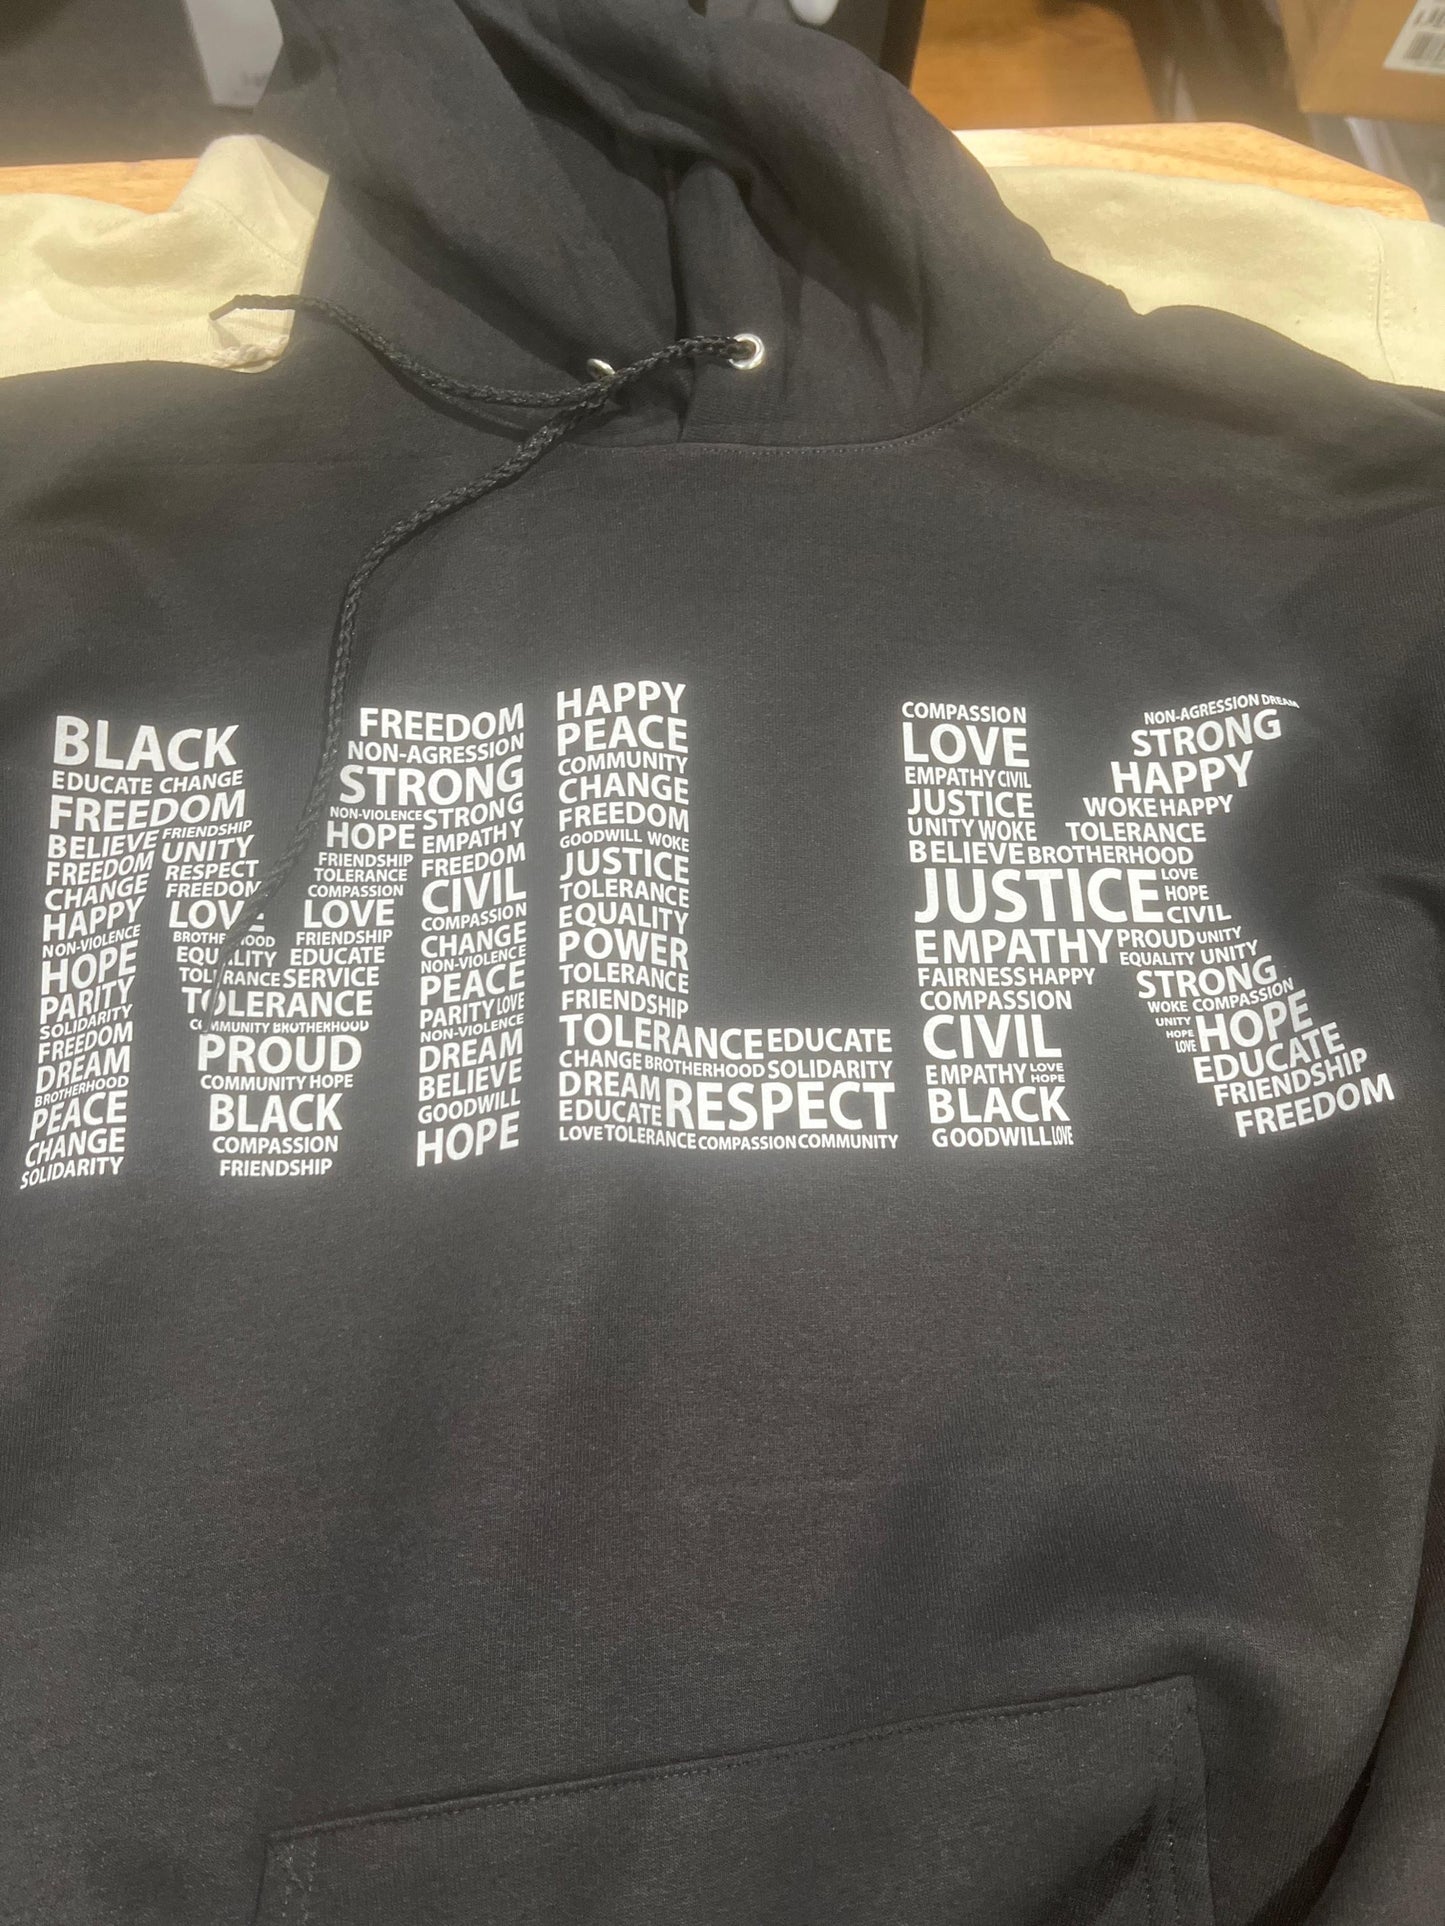 MLK SHIRT(front and Back)